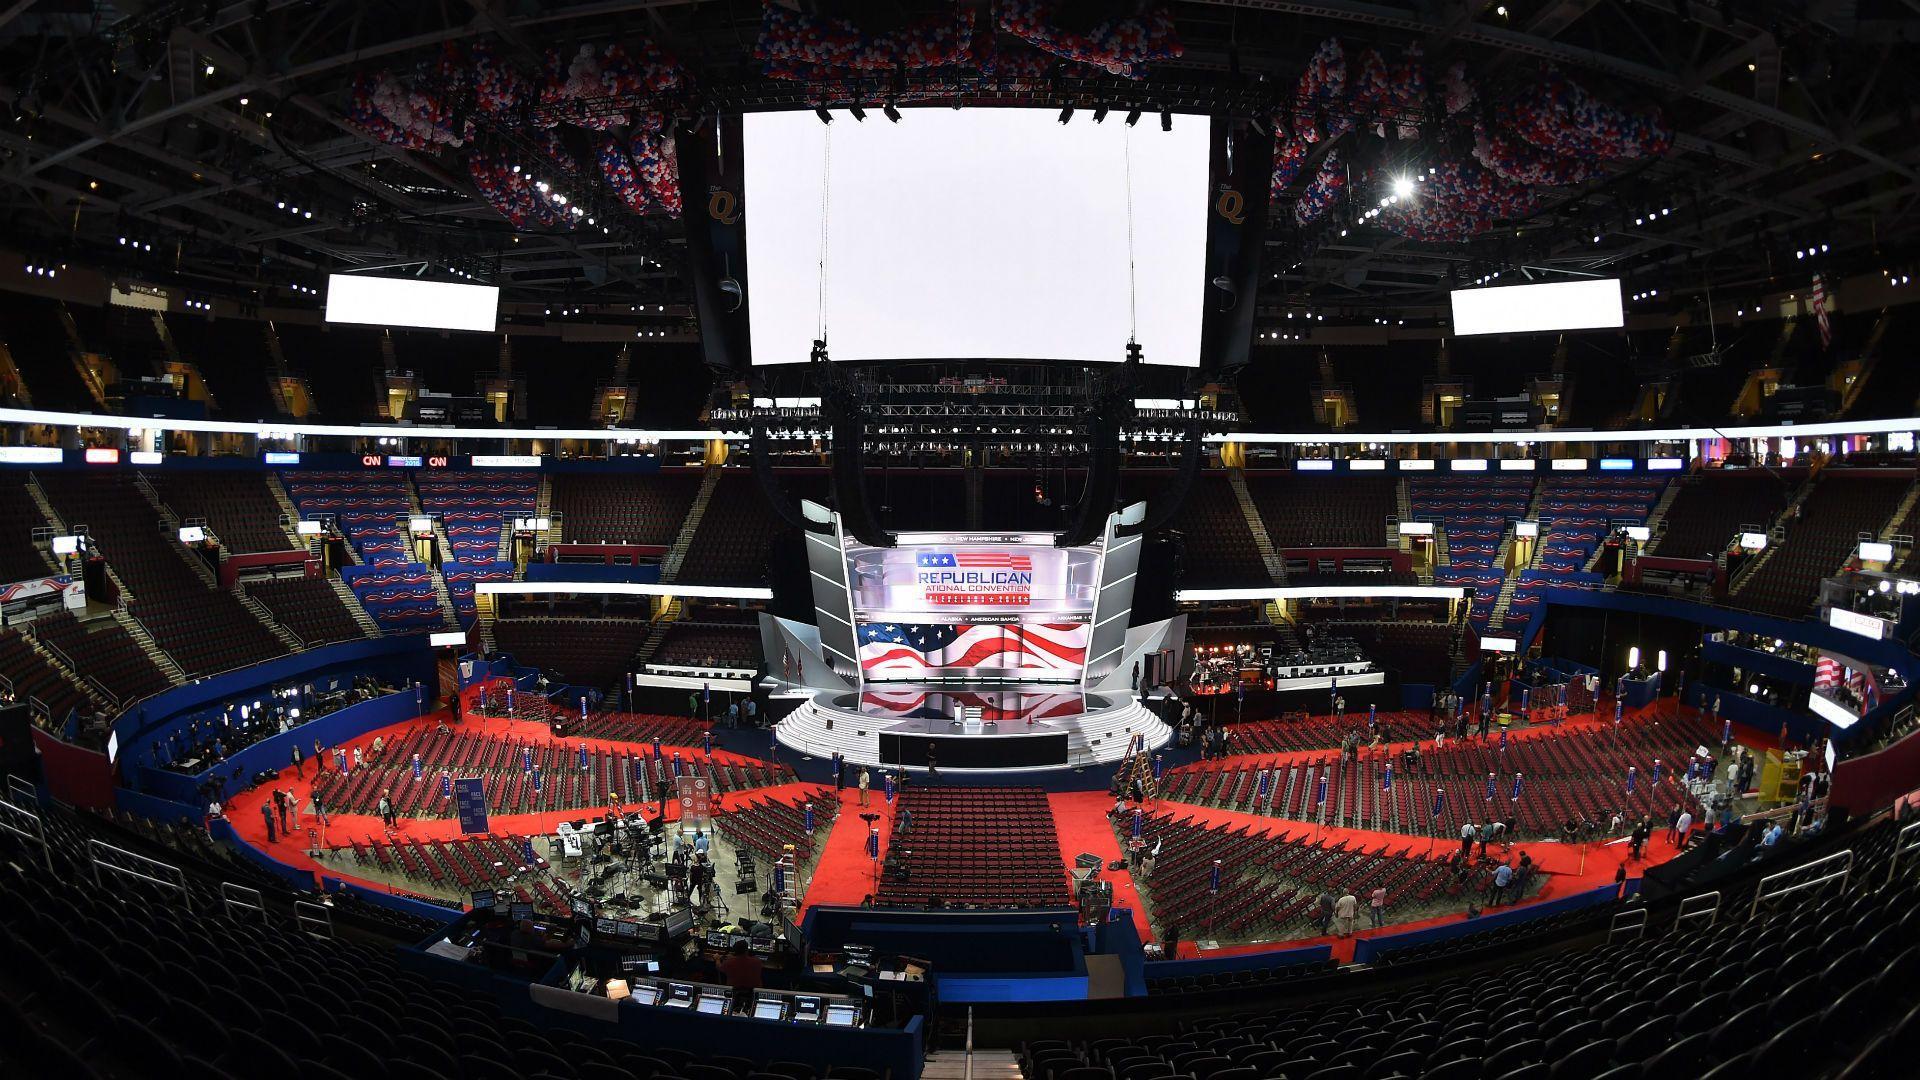 Quicken Loans Arena transforms for Republican National Convention